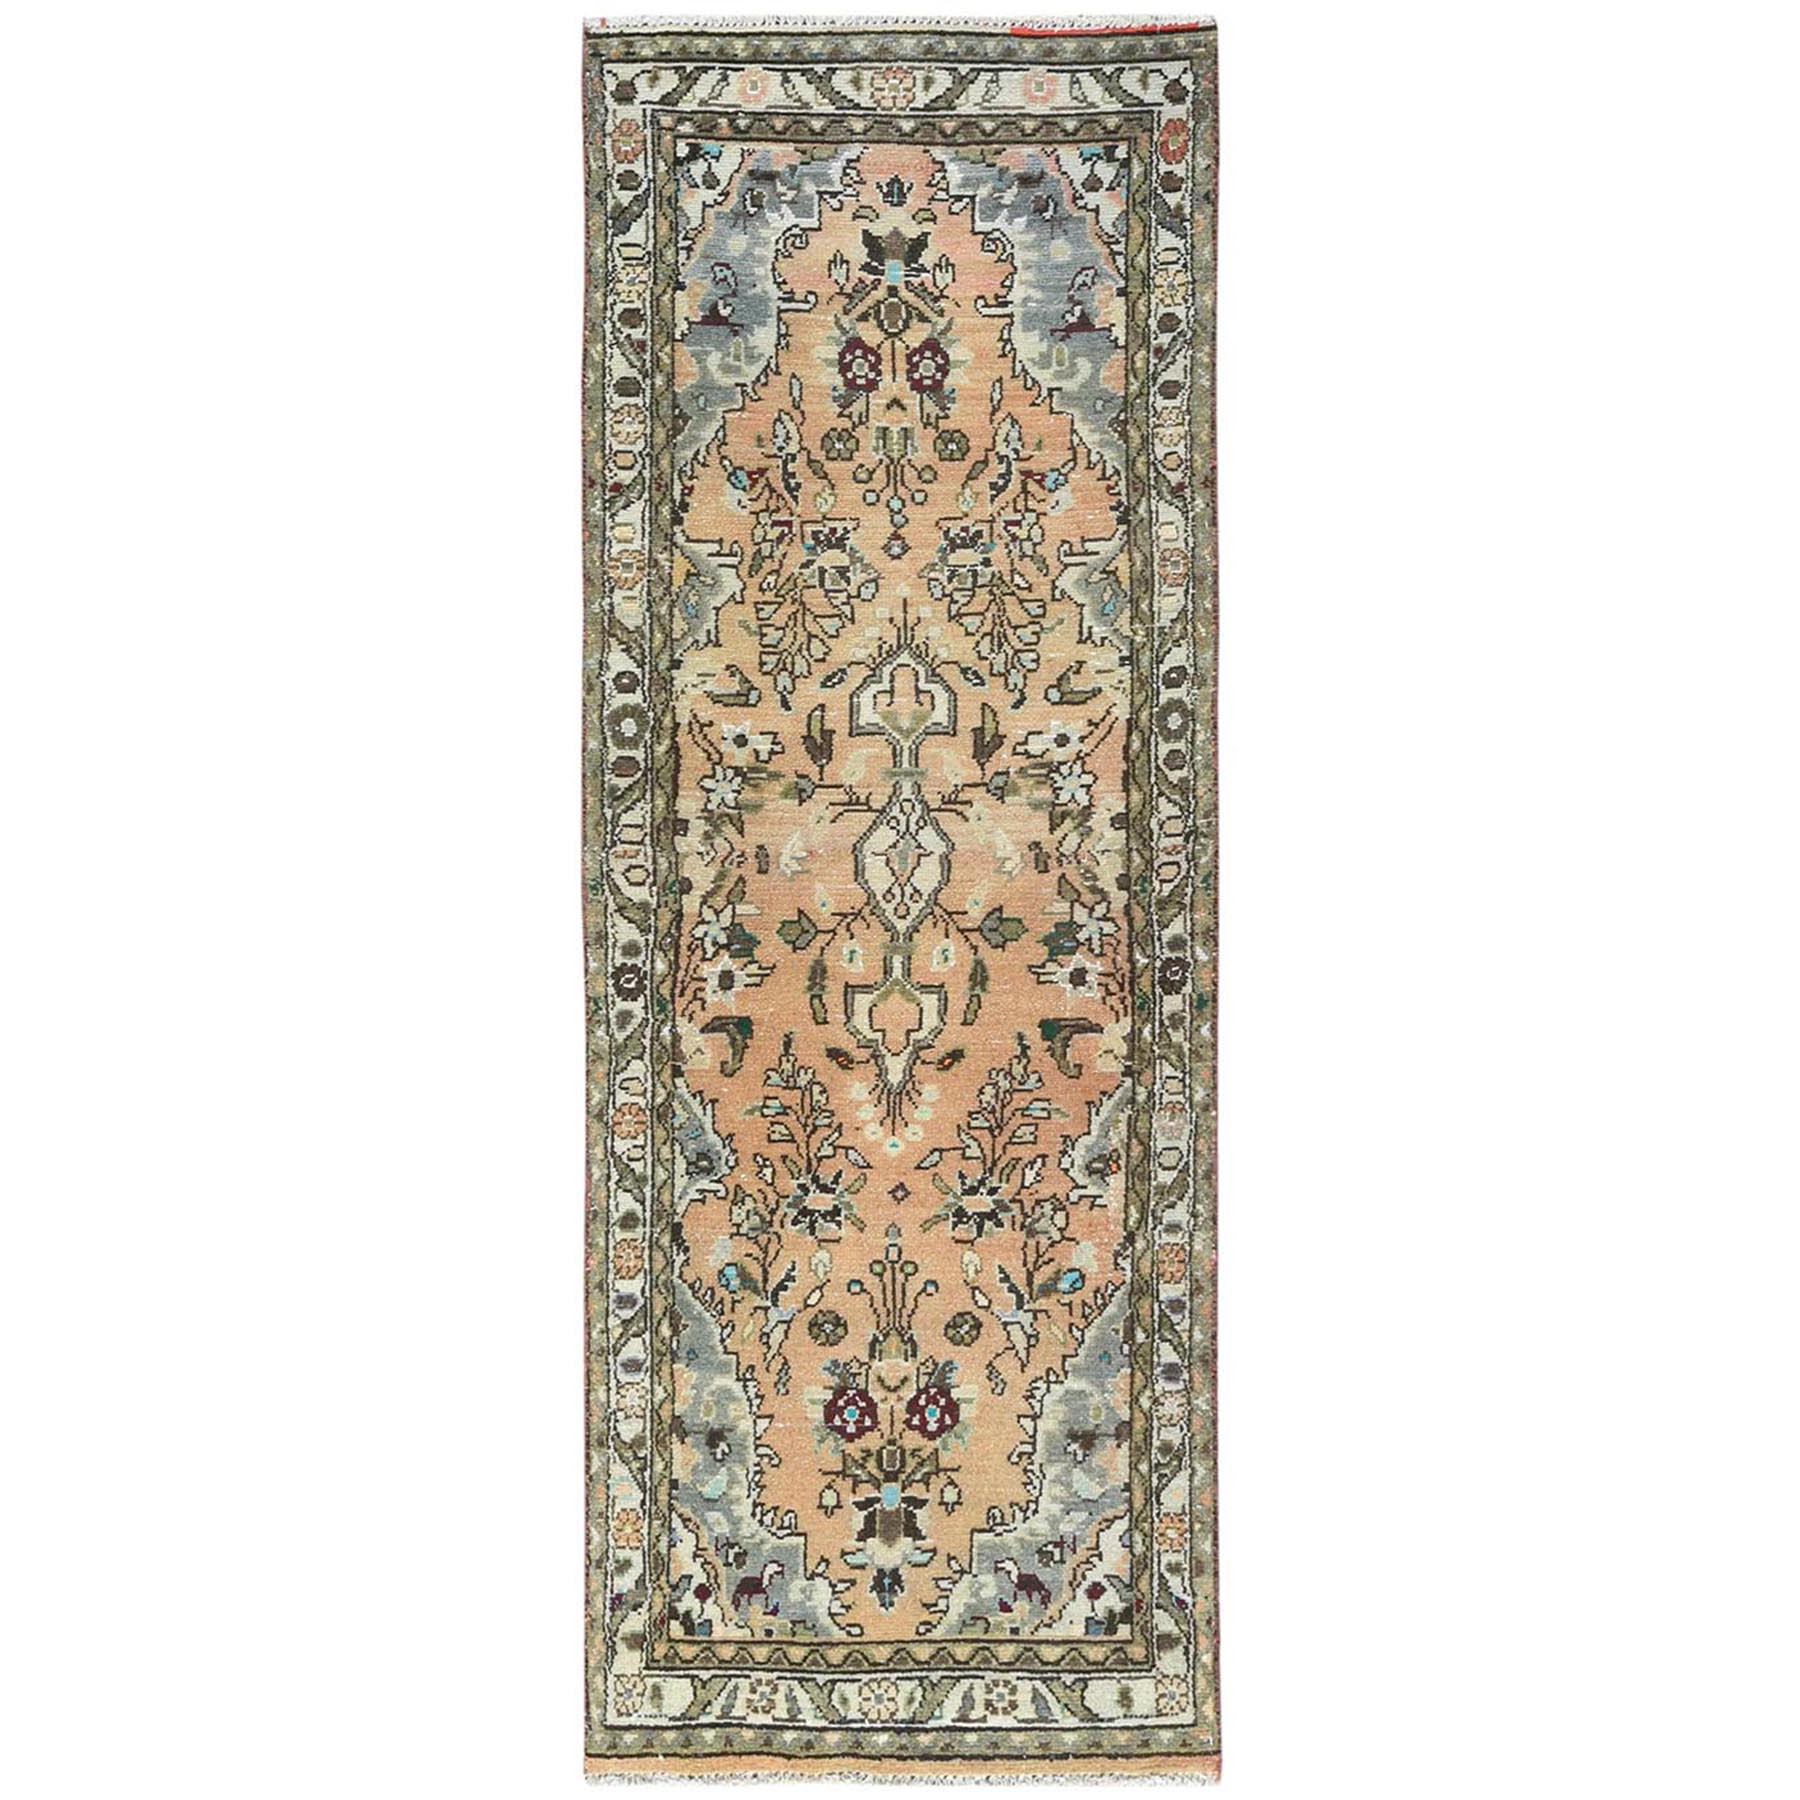  Wool Hand-Knotted Area Rug 2'5